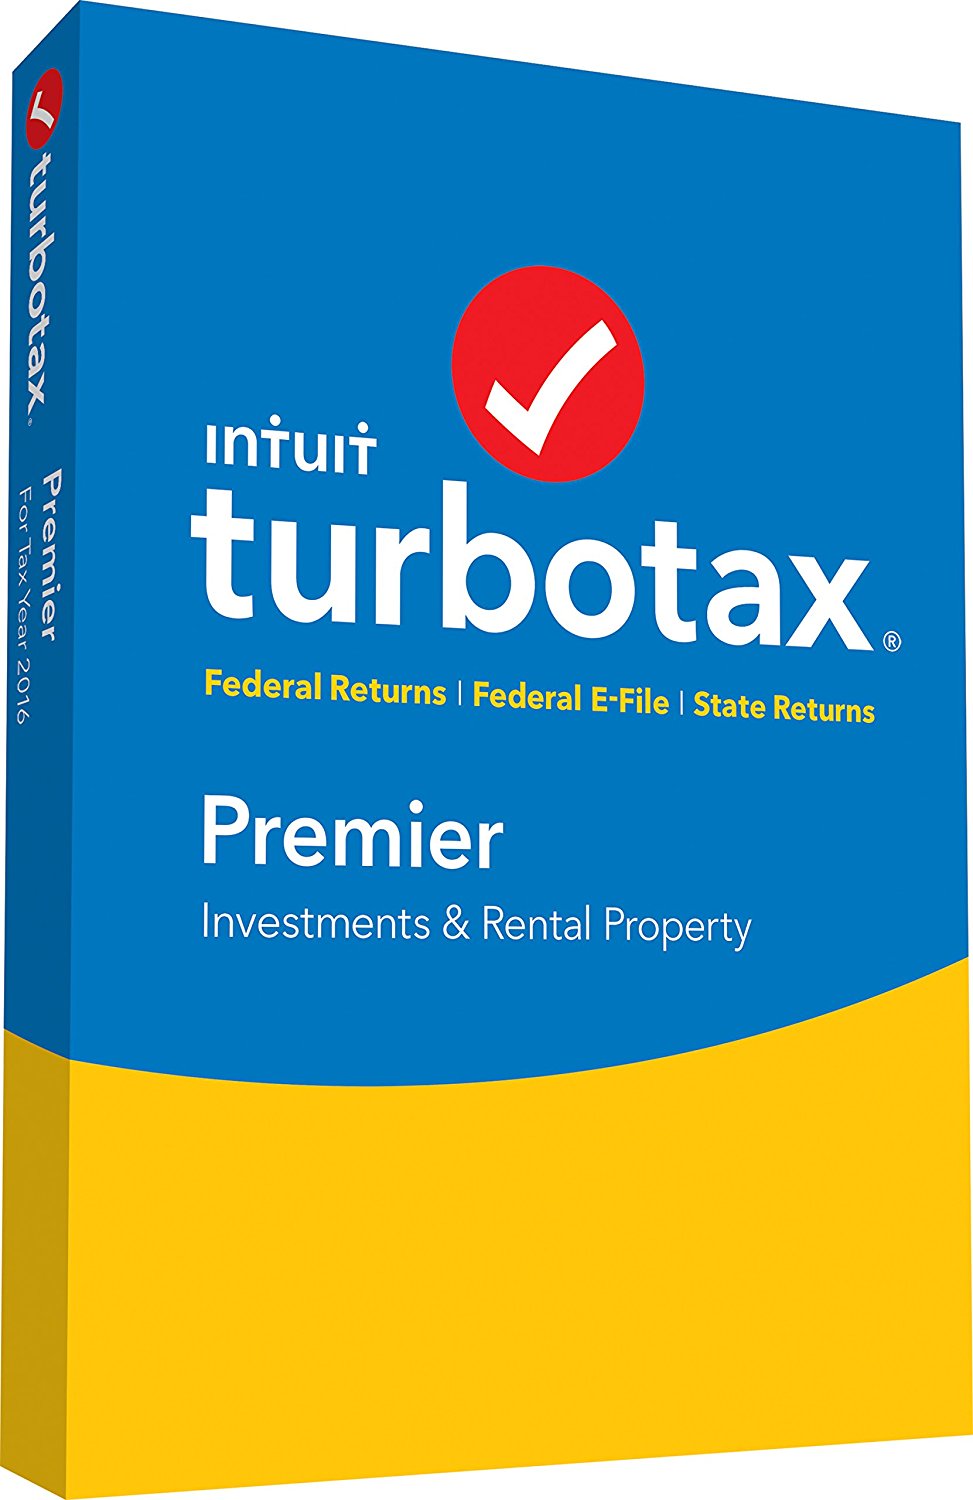 promo on TurboTax 2016 and Quicken 2017 